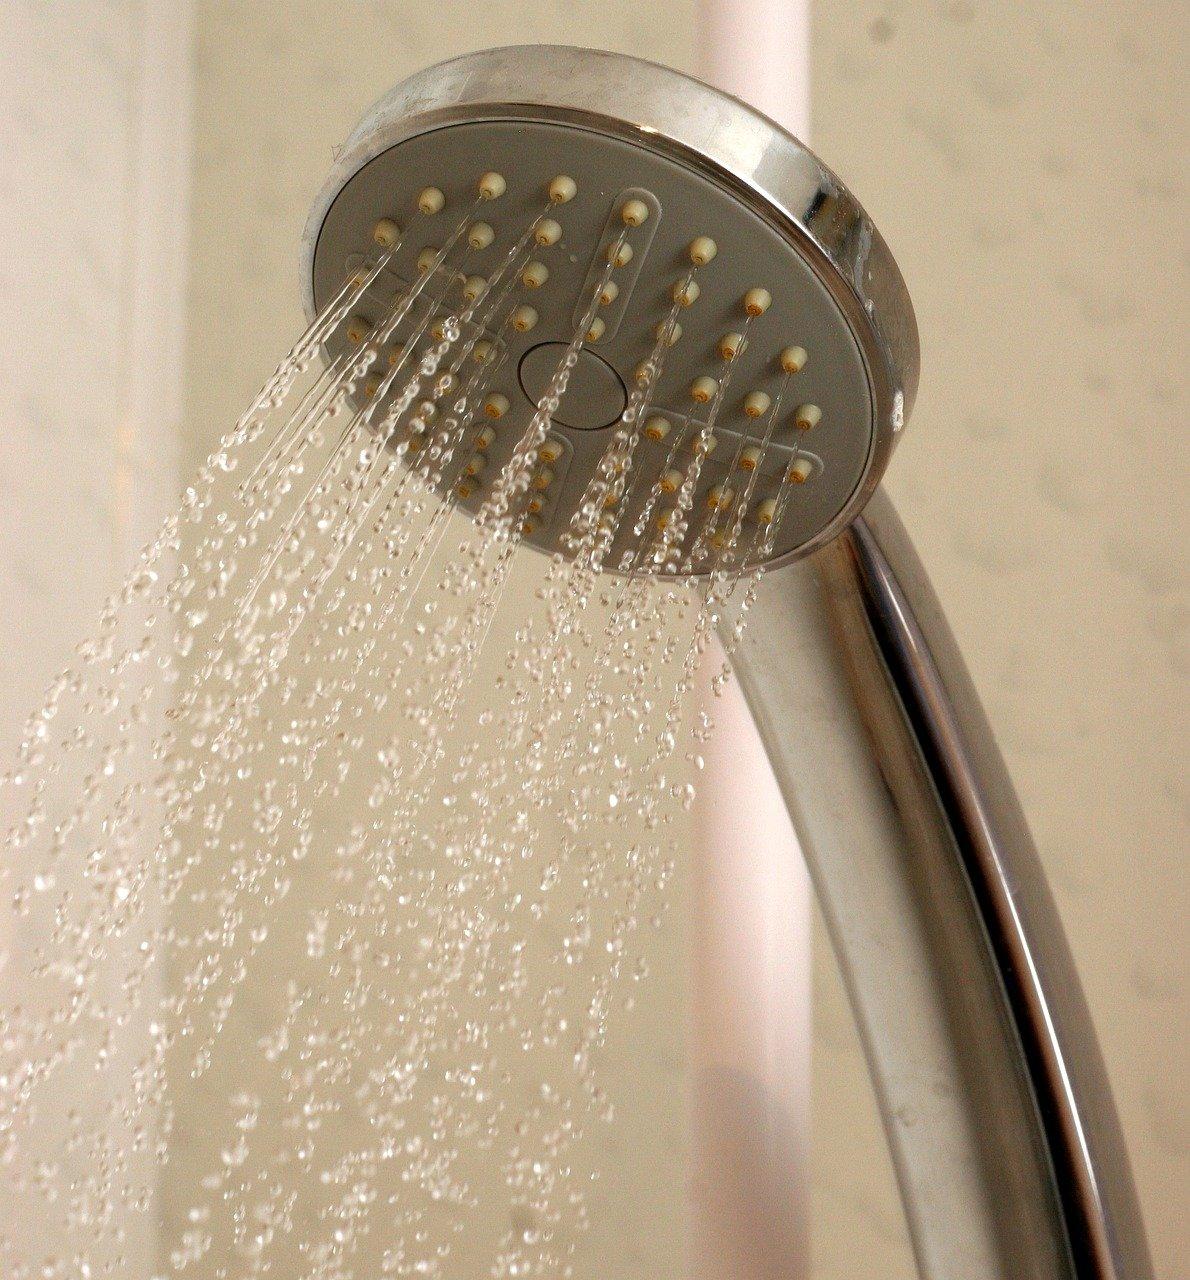 Exploring the Skin and Hair Benefits of Cold Showers - Loving Life